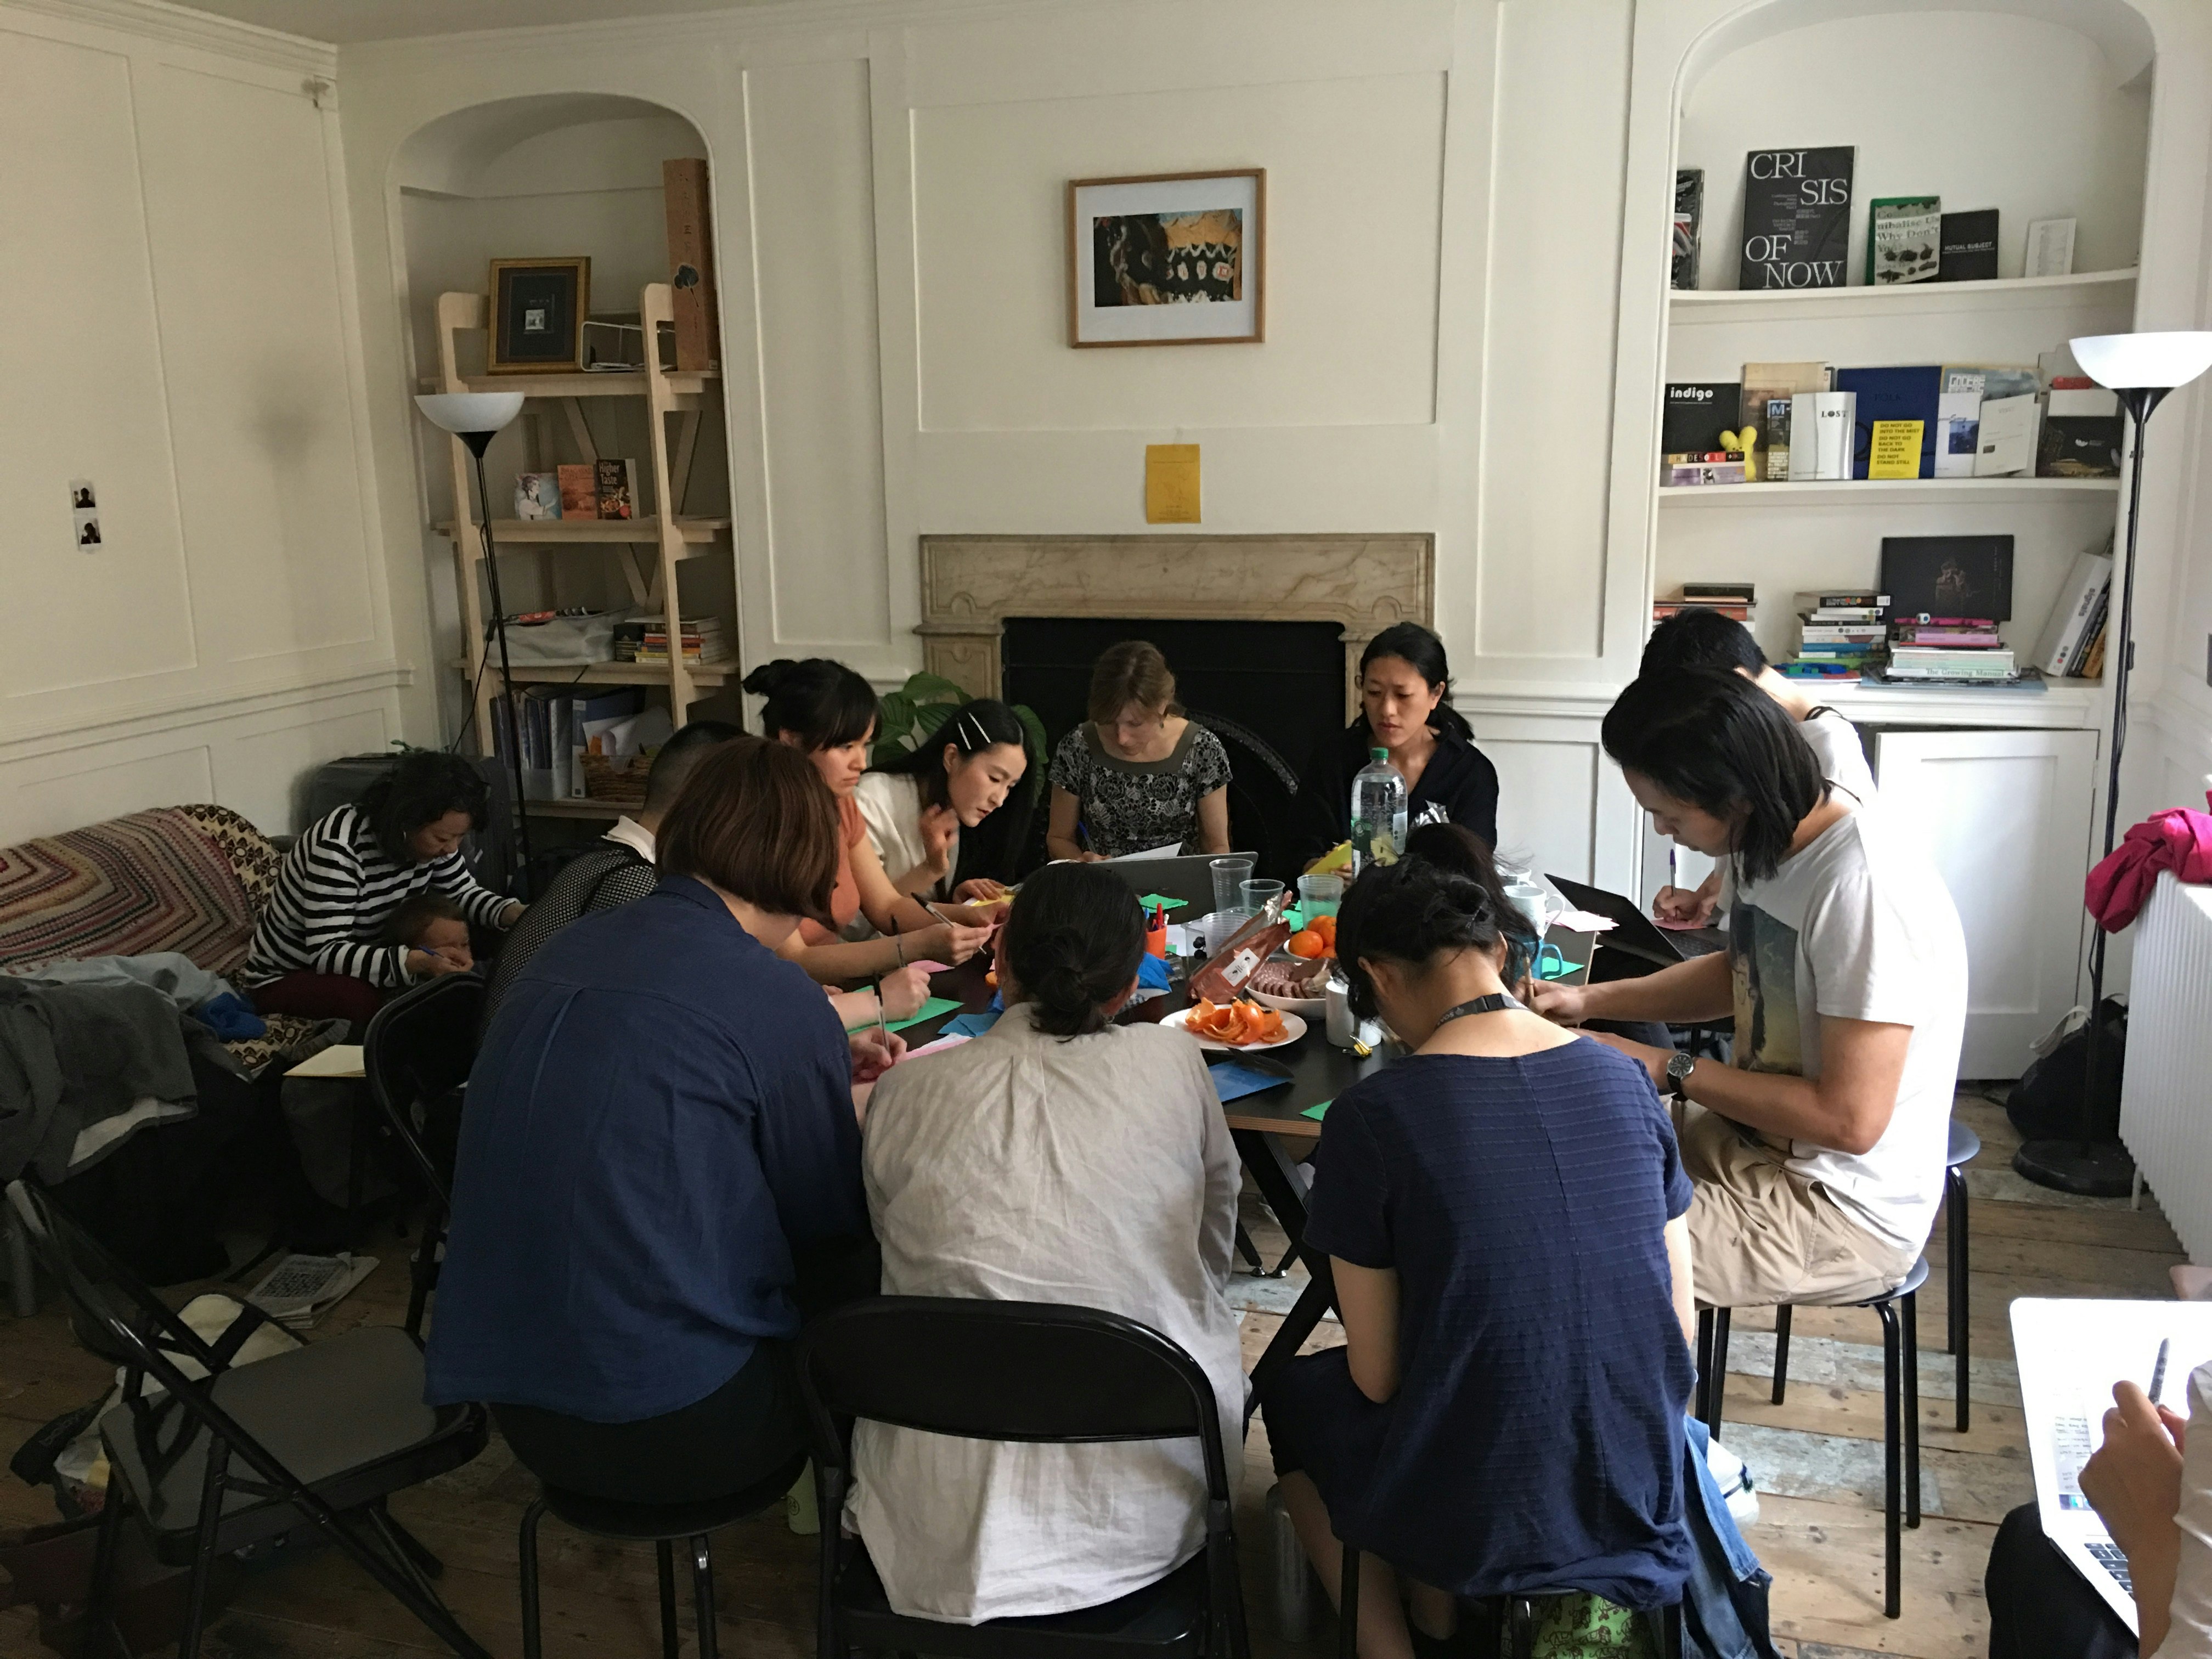 A group of artists of Asian descent seated around a table. 